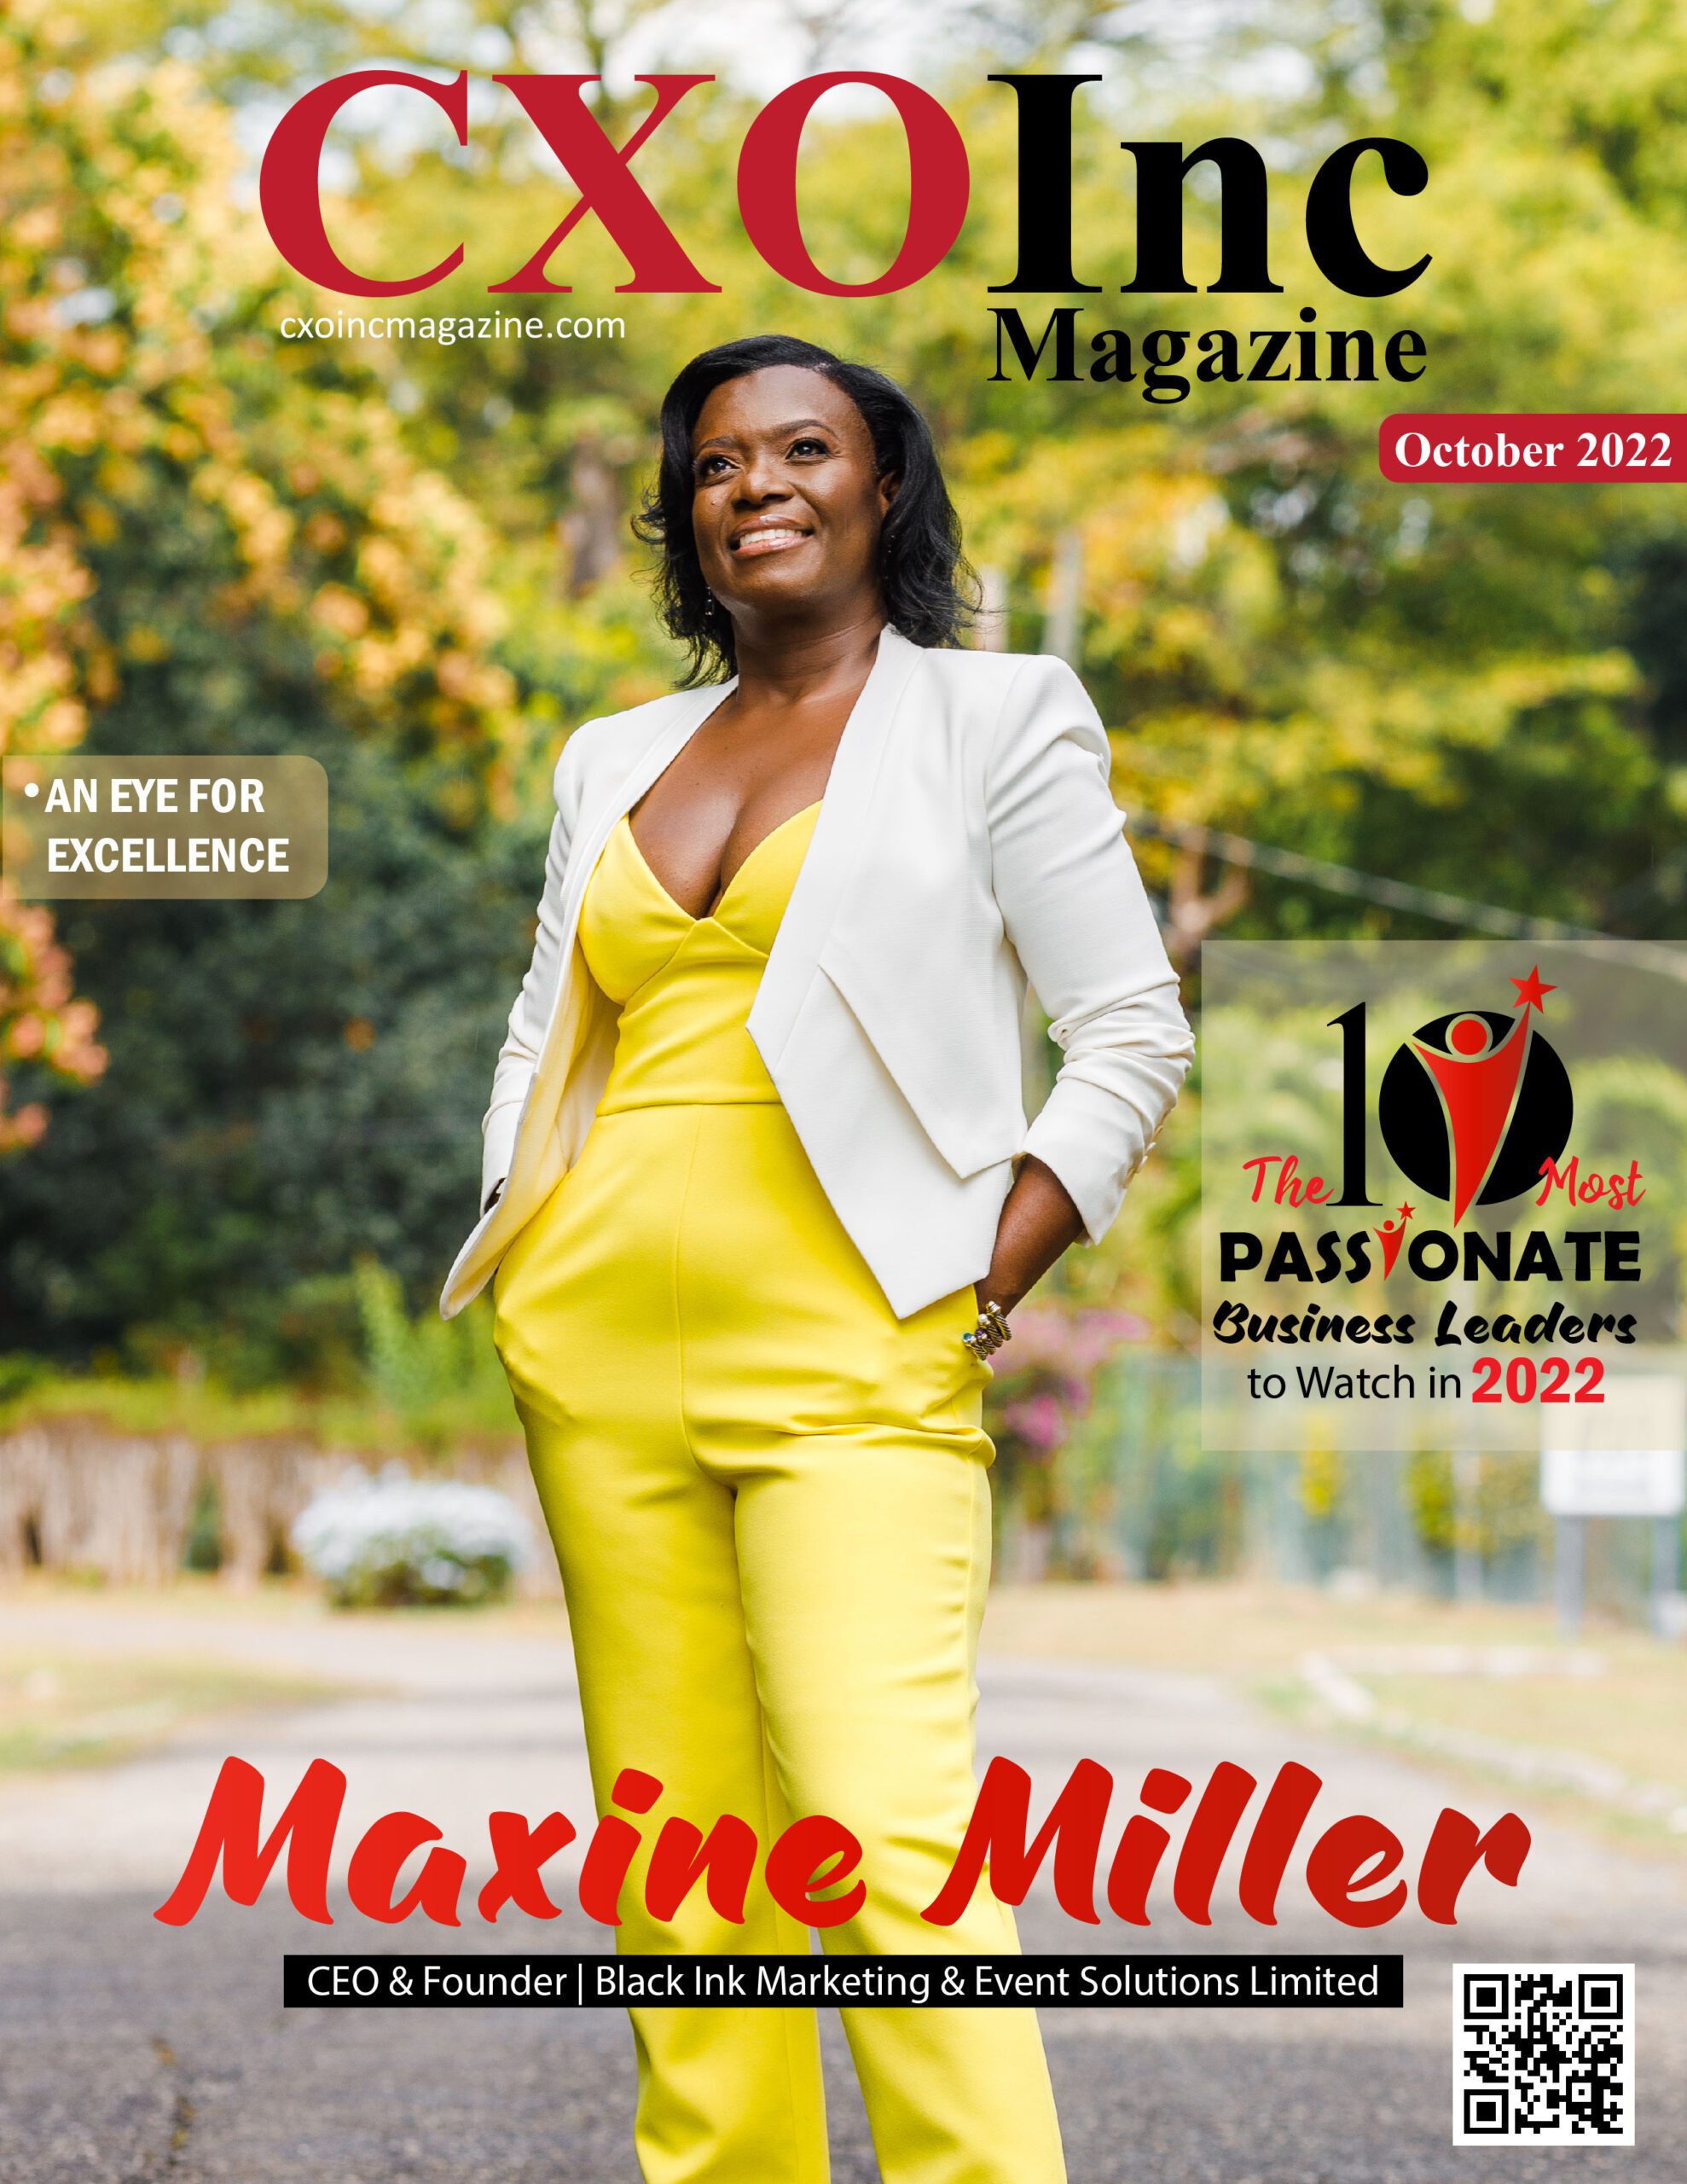 Cover Page - The 10 Most Passionate Business Leaders to Watch in 2022 | Business Magazine | CXO Inc Magazine